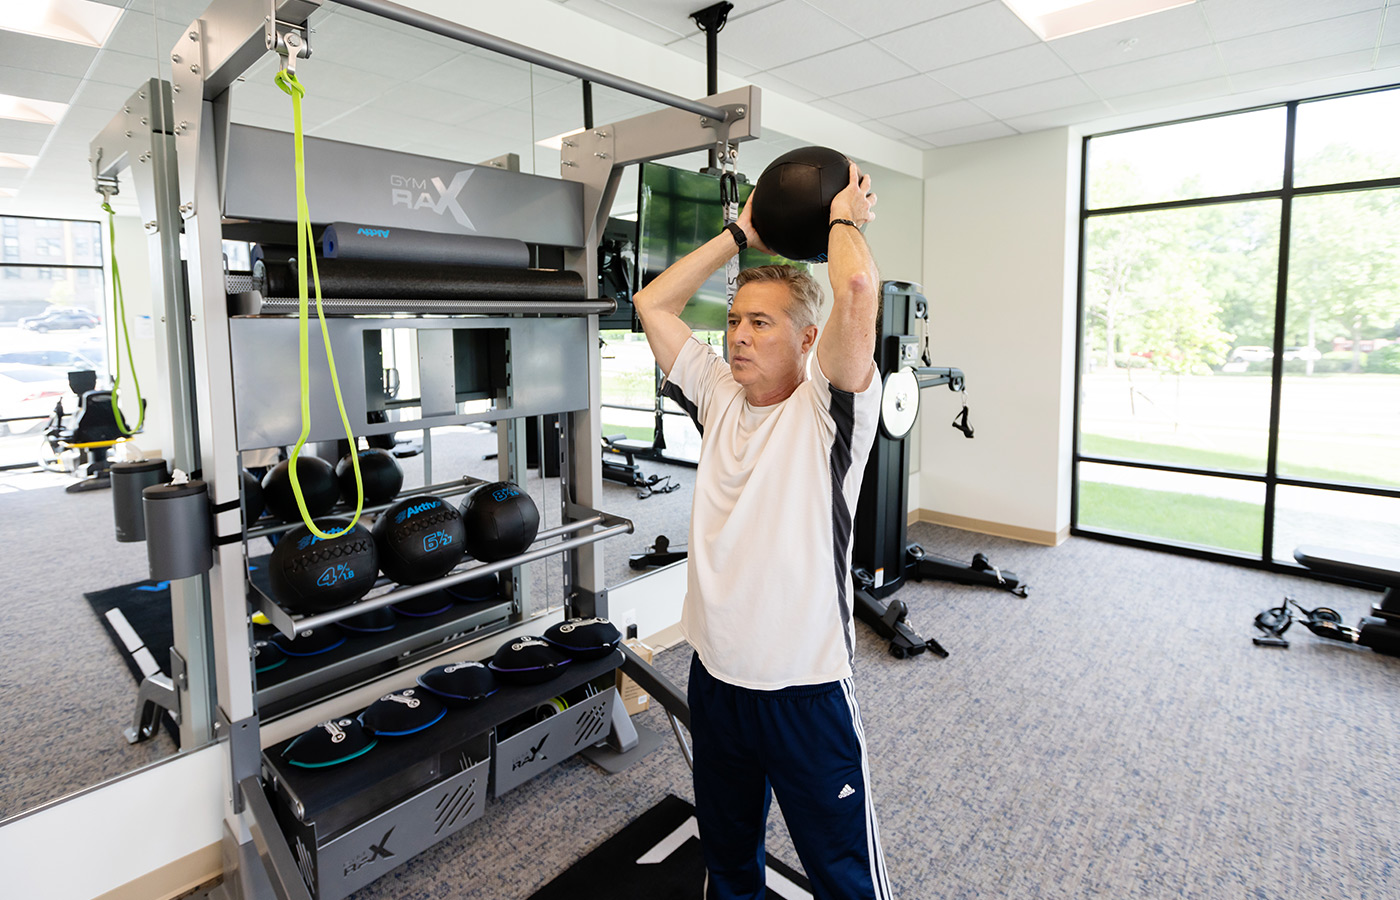 A resident working out in the fitness center.